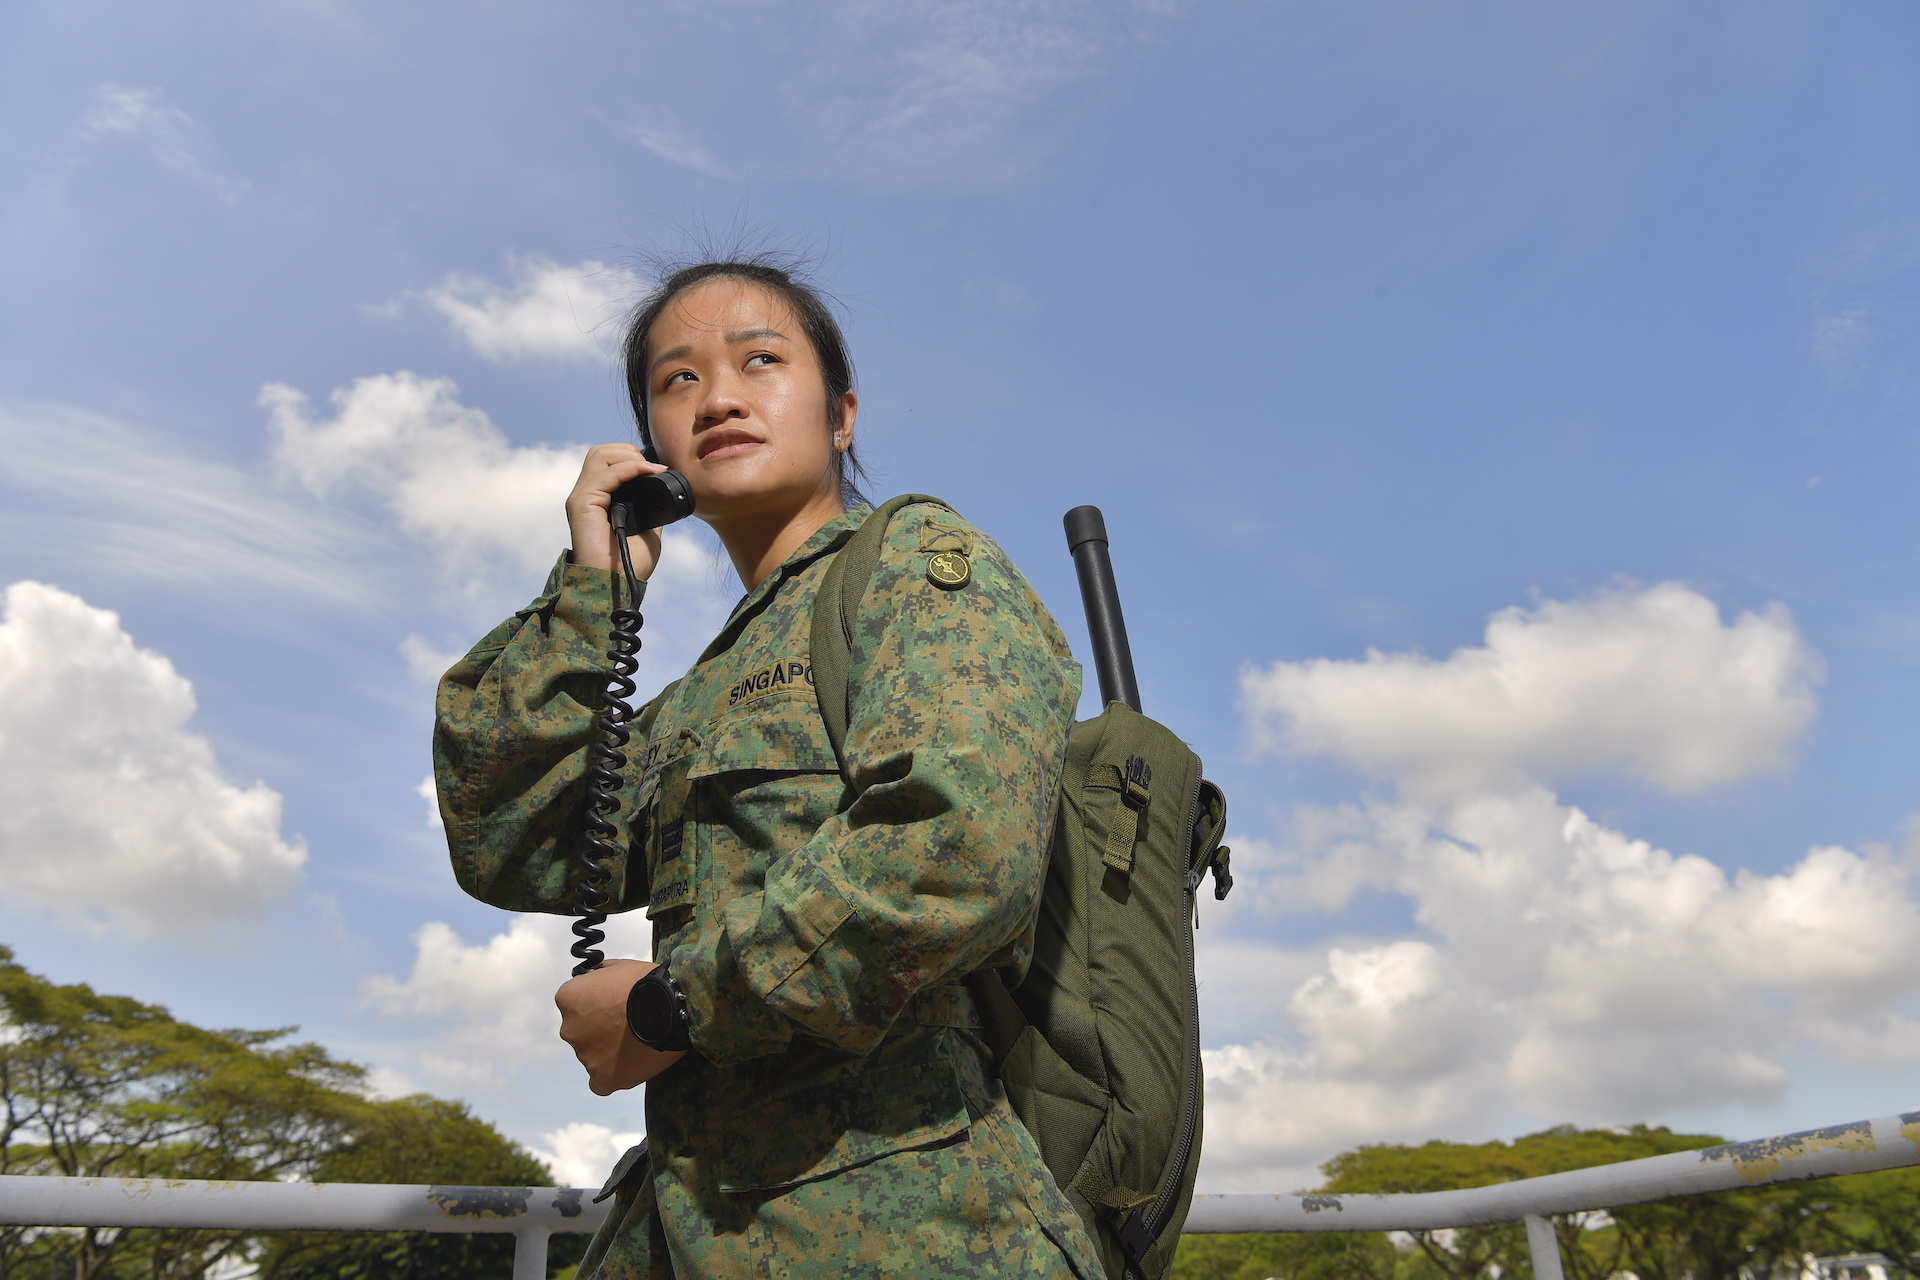 Meet the SAF's only female Ground Forward Air Controller